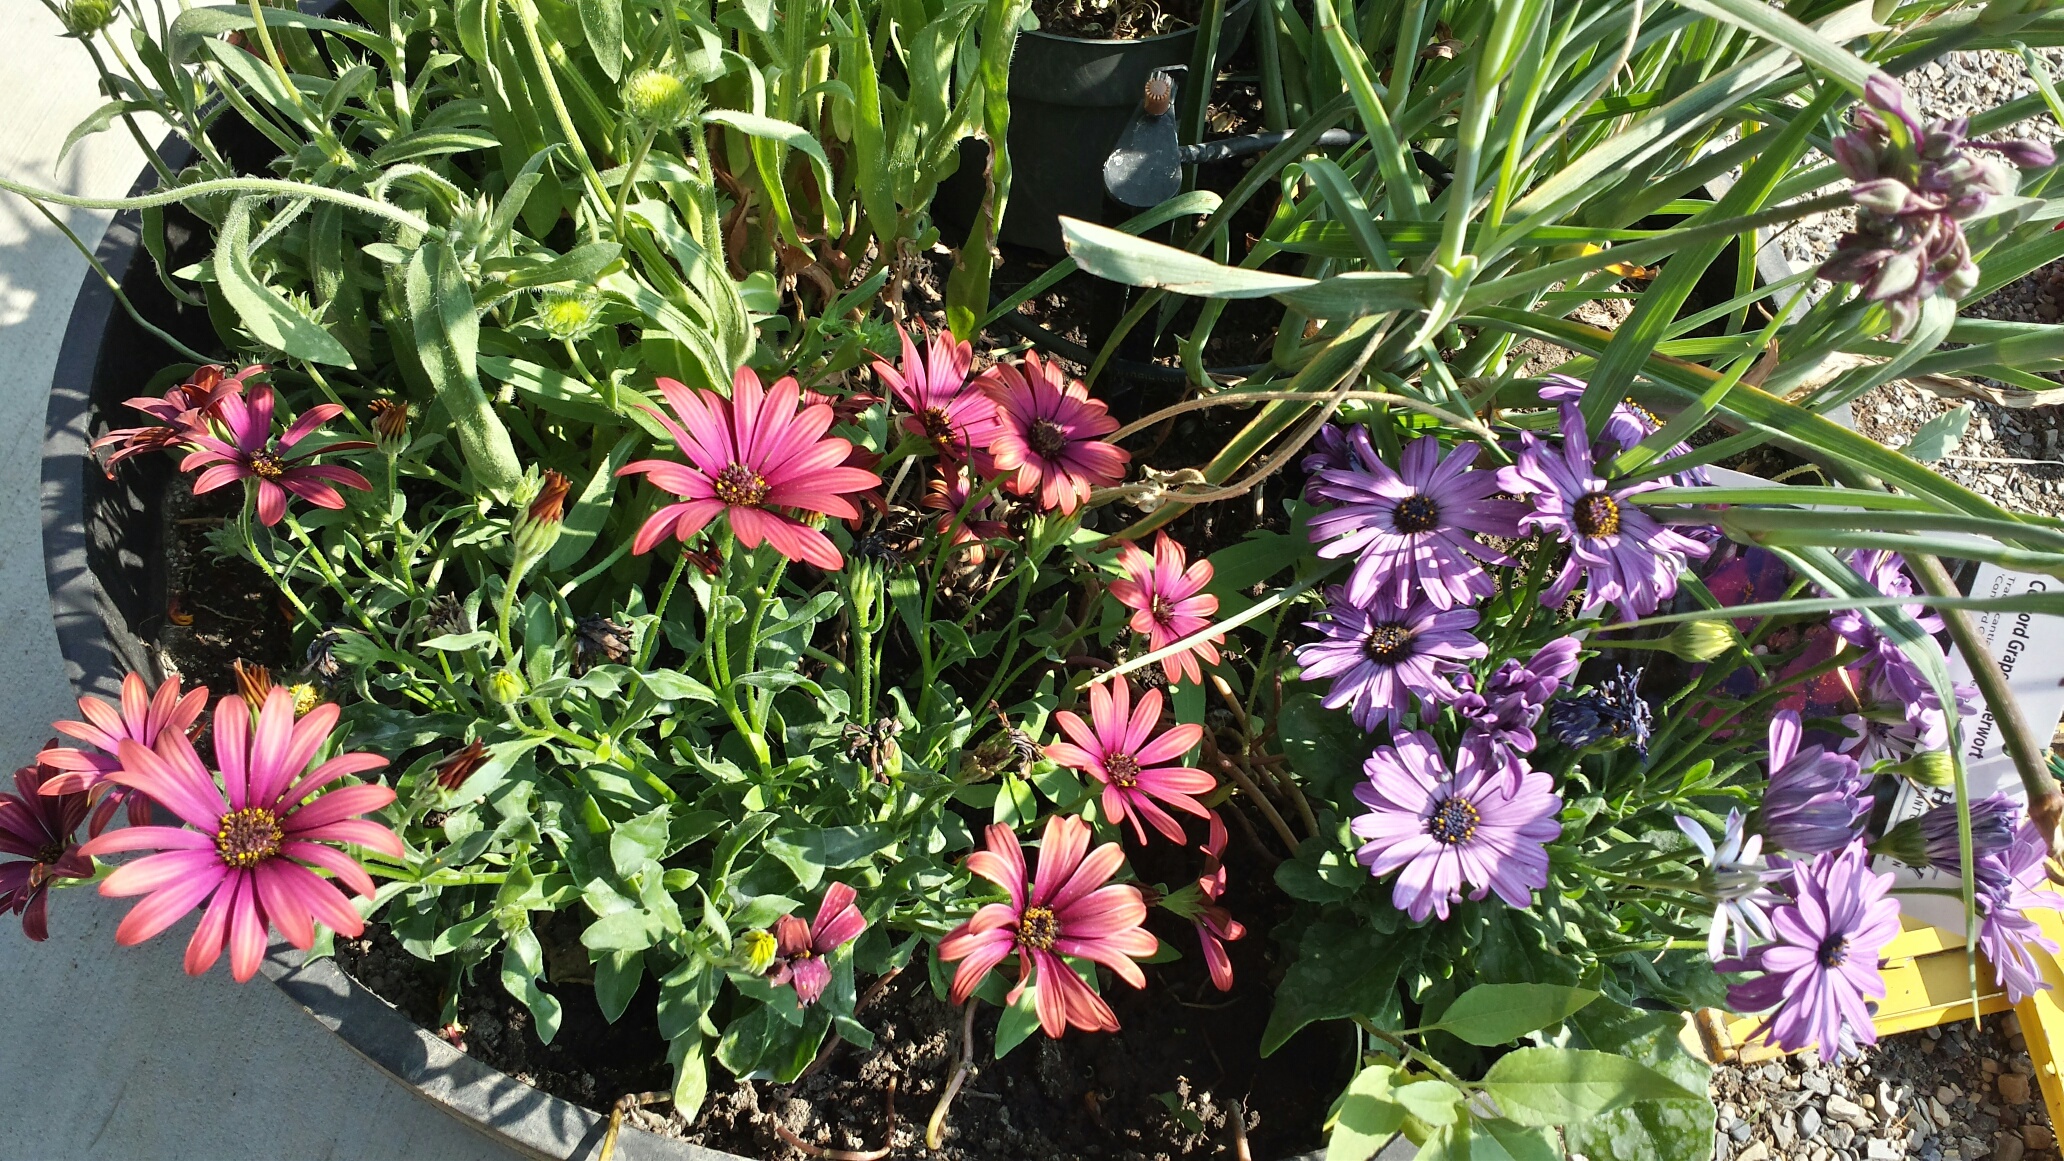 Close-up of a flower pot of pink and purple daisies.